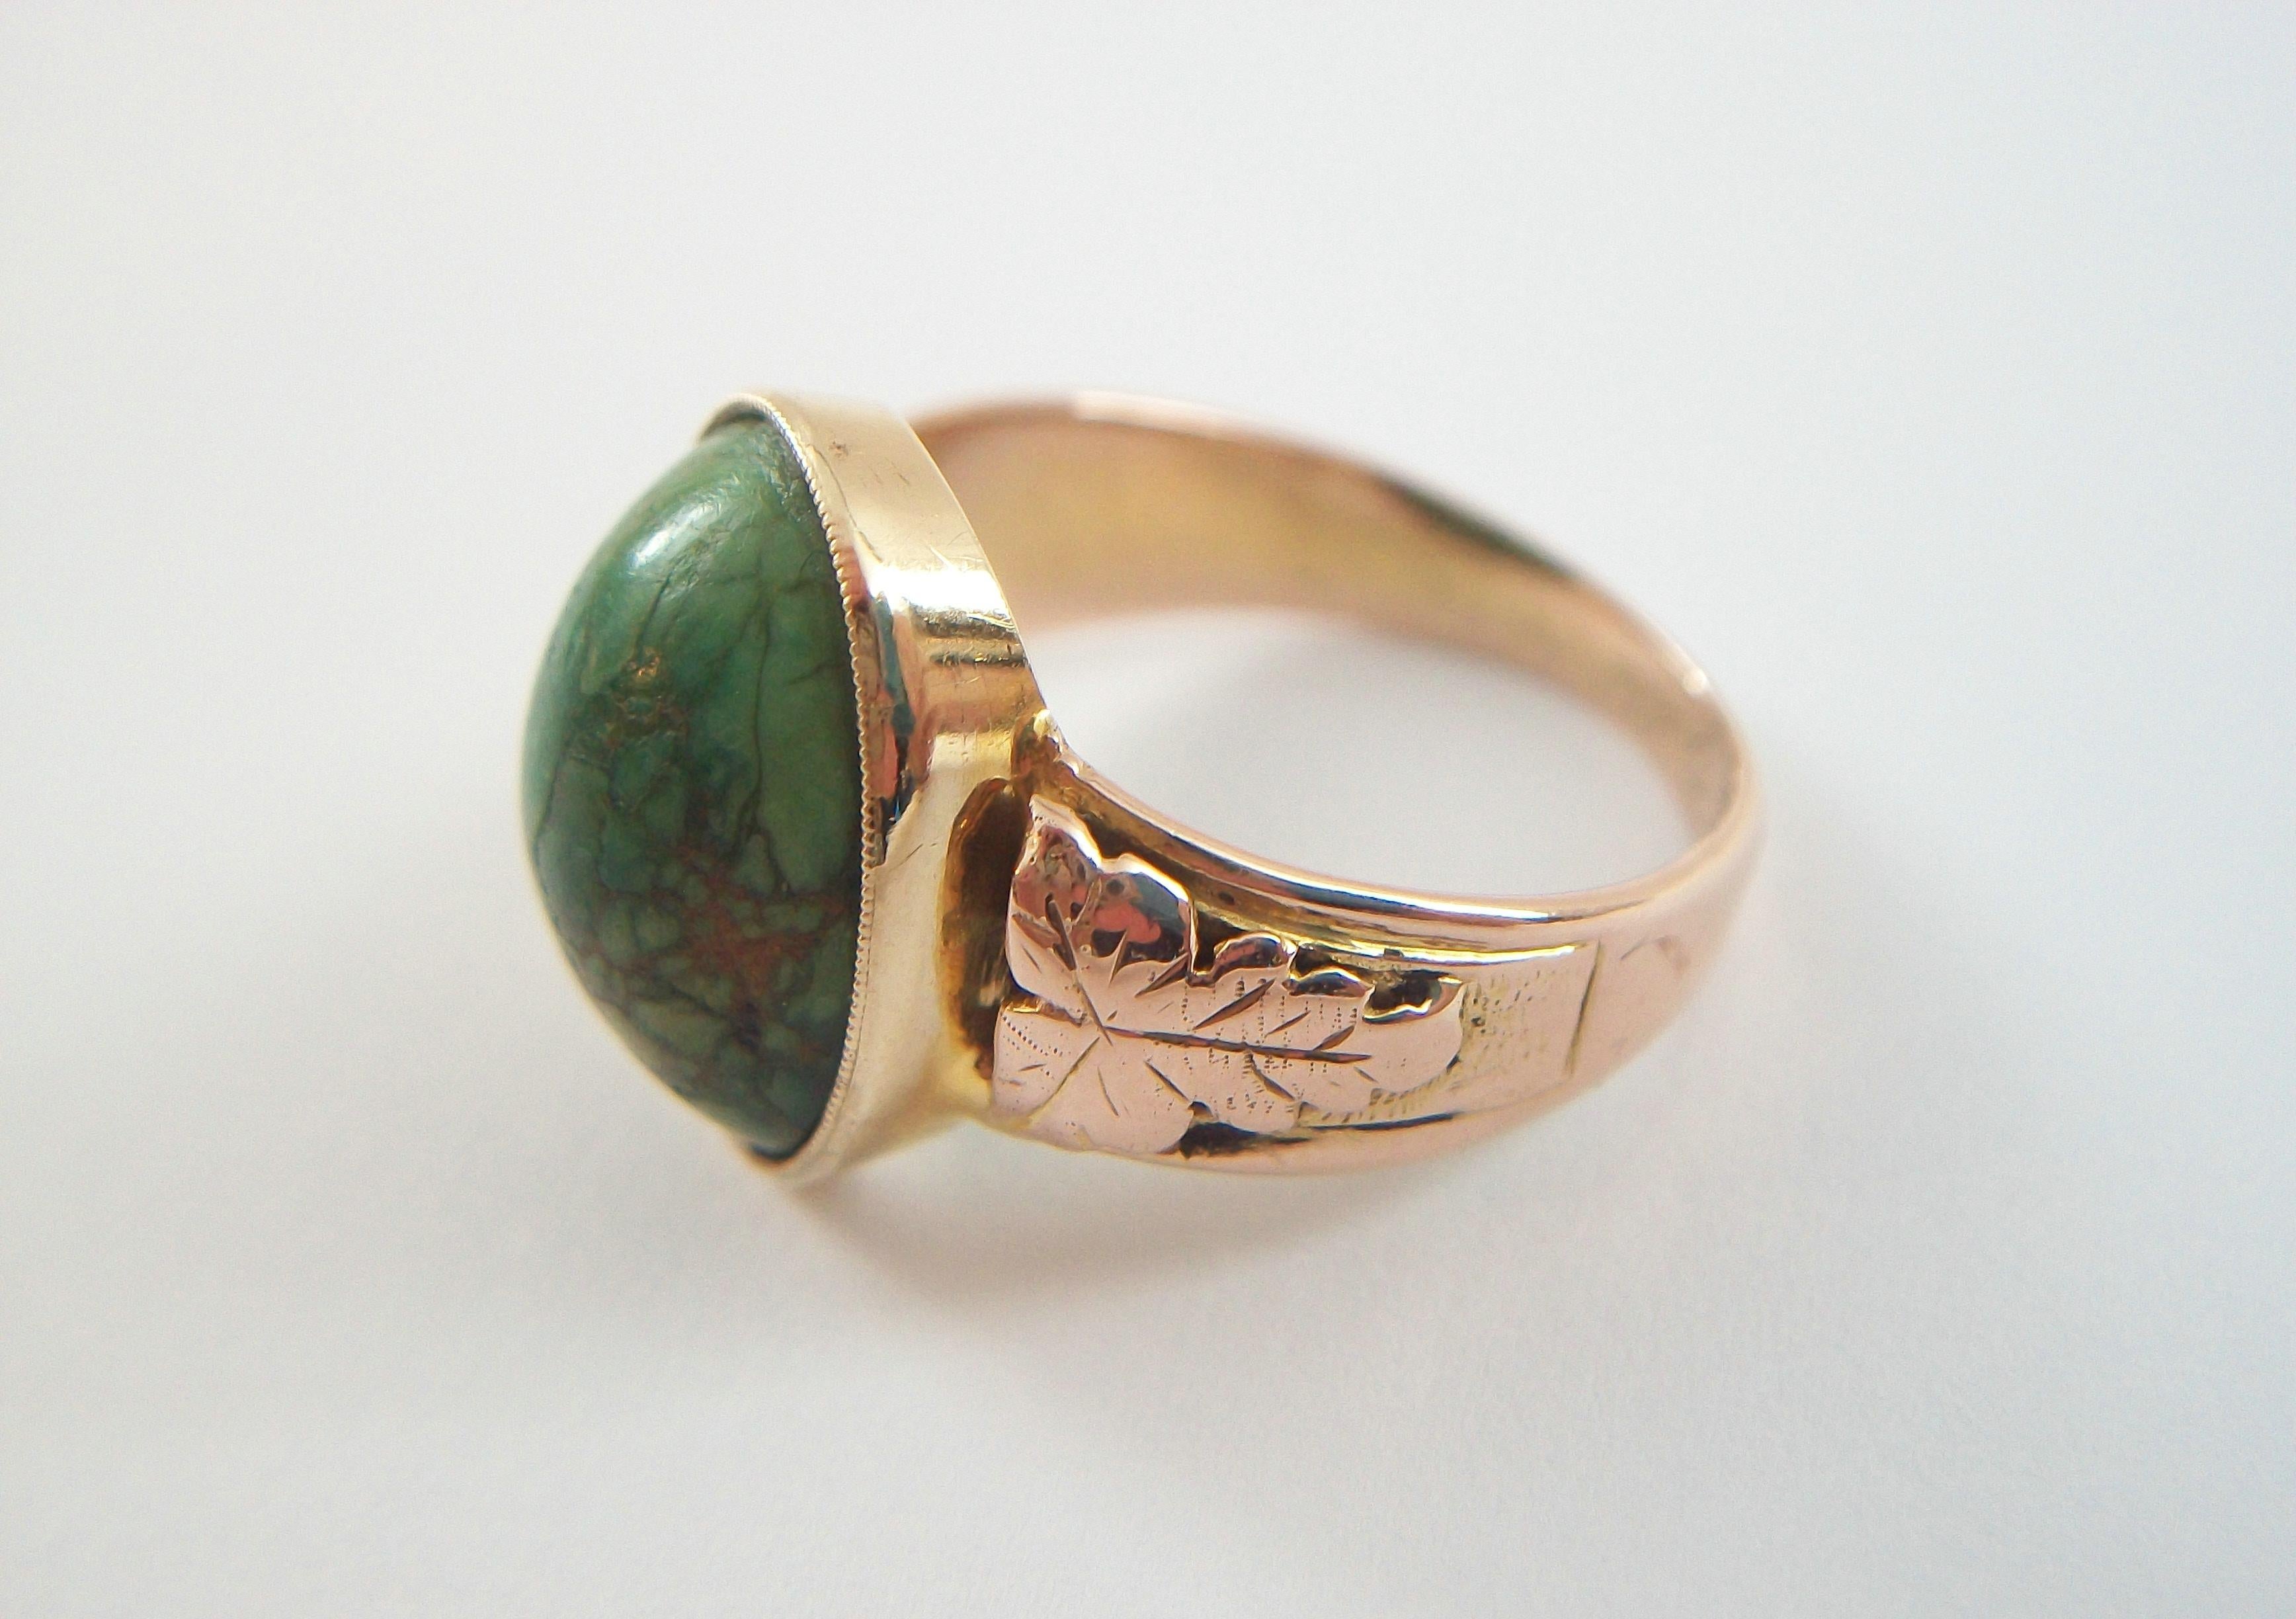 Victorian Cabochon Turquoise & 18K Gold Ring - United Kingdom - Circa 1900 For Sale 1